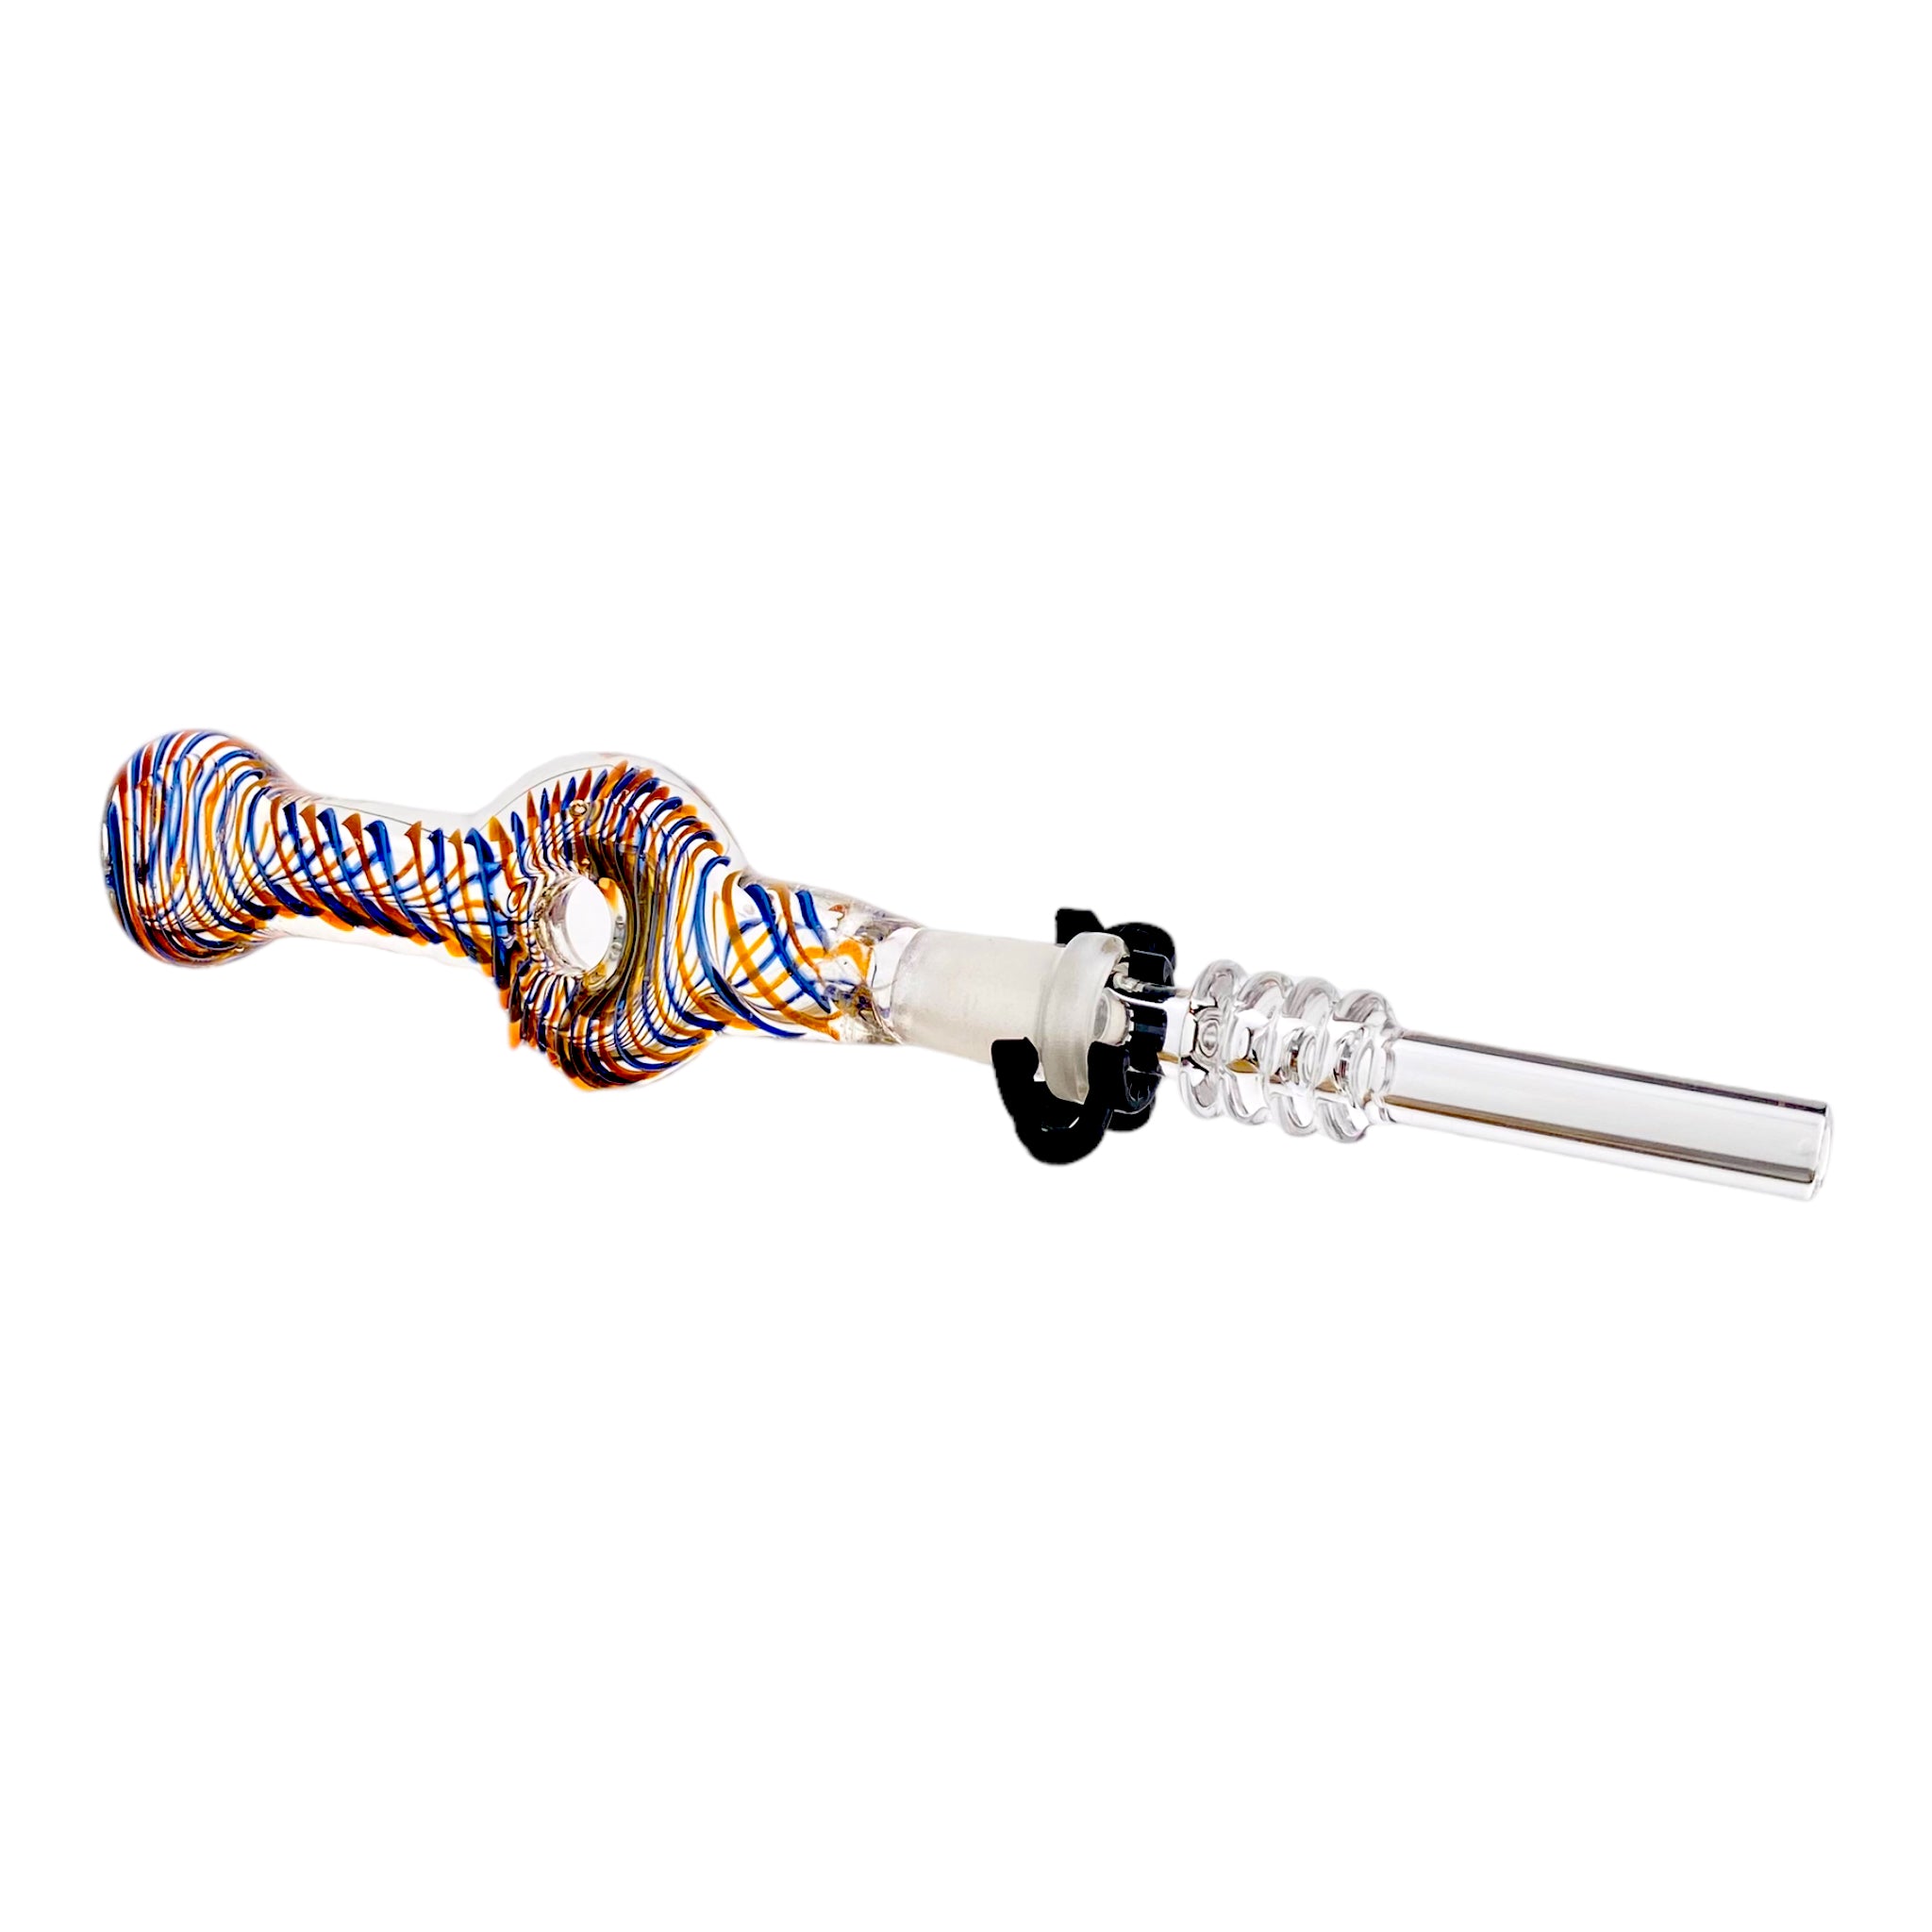 10mm Nectar Collector - Blue And Orange Inside Out Spiral Donut With 10mm Quartz Tip